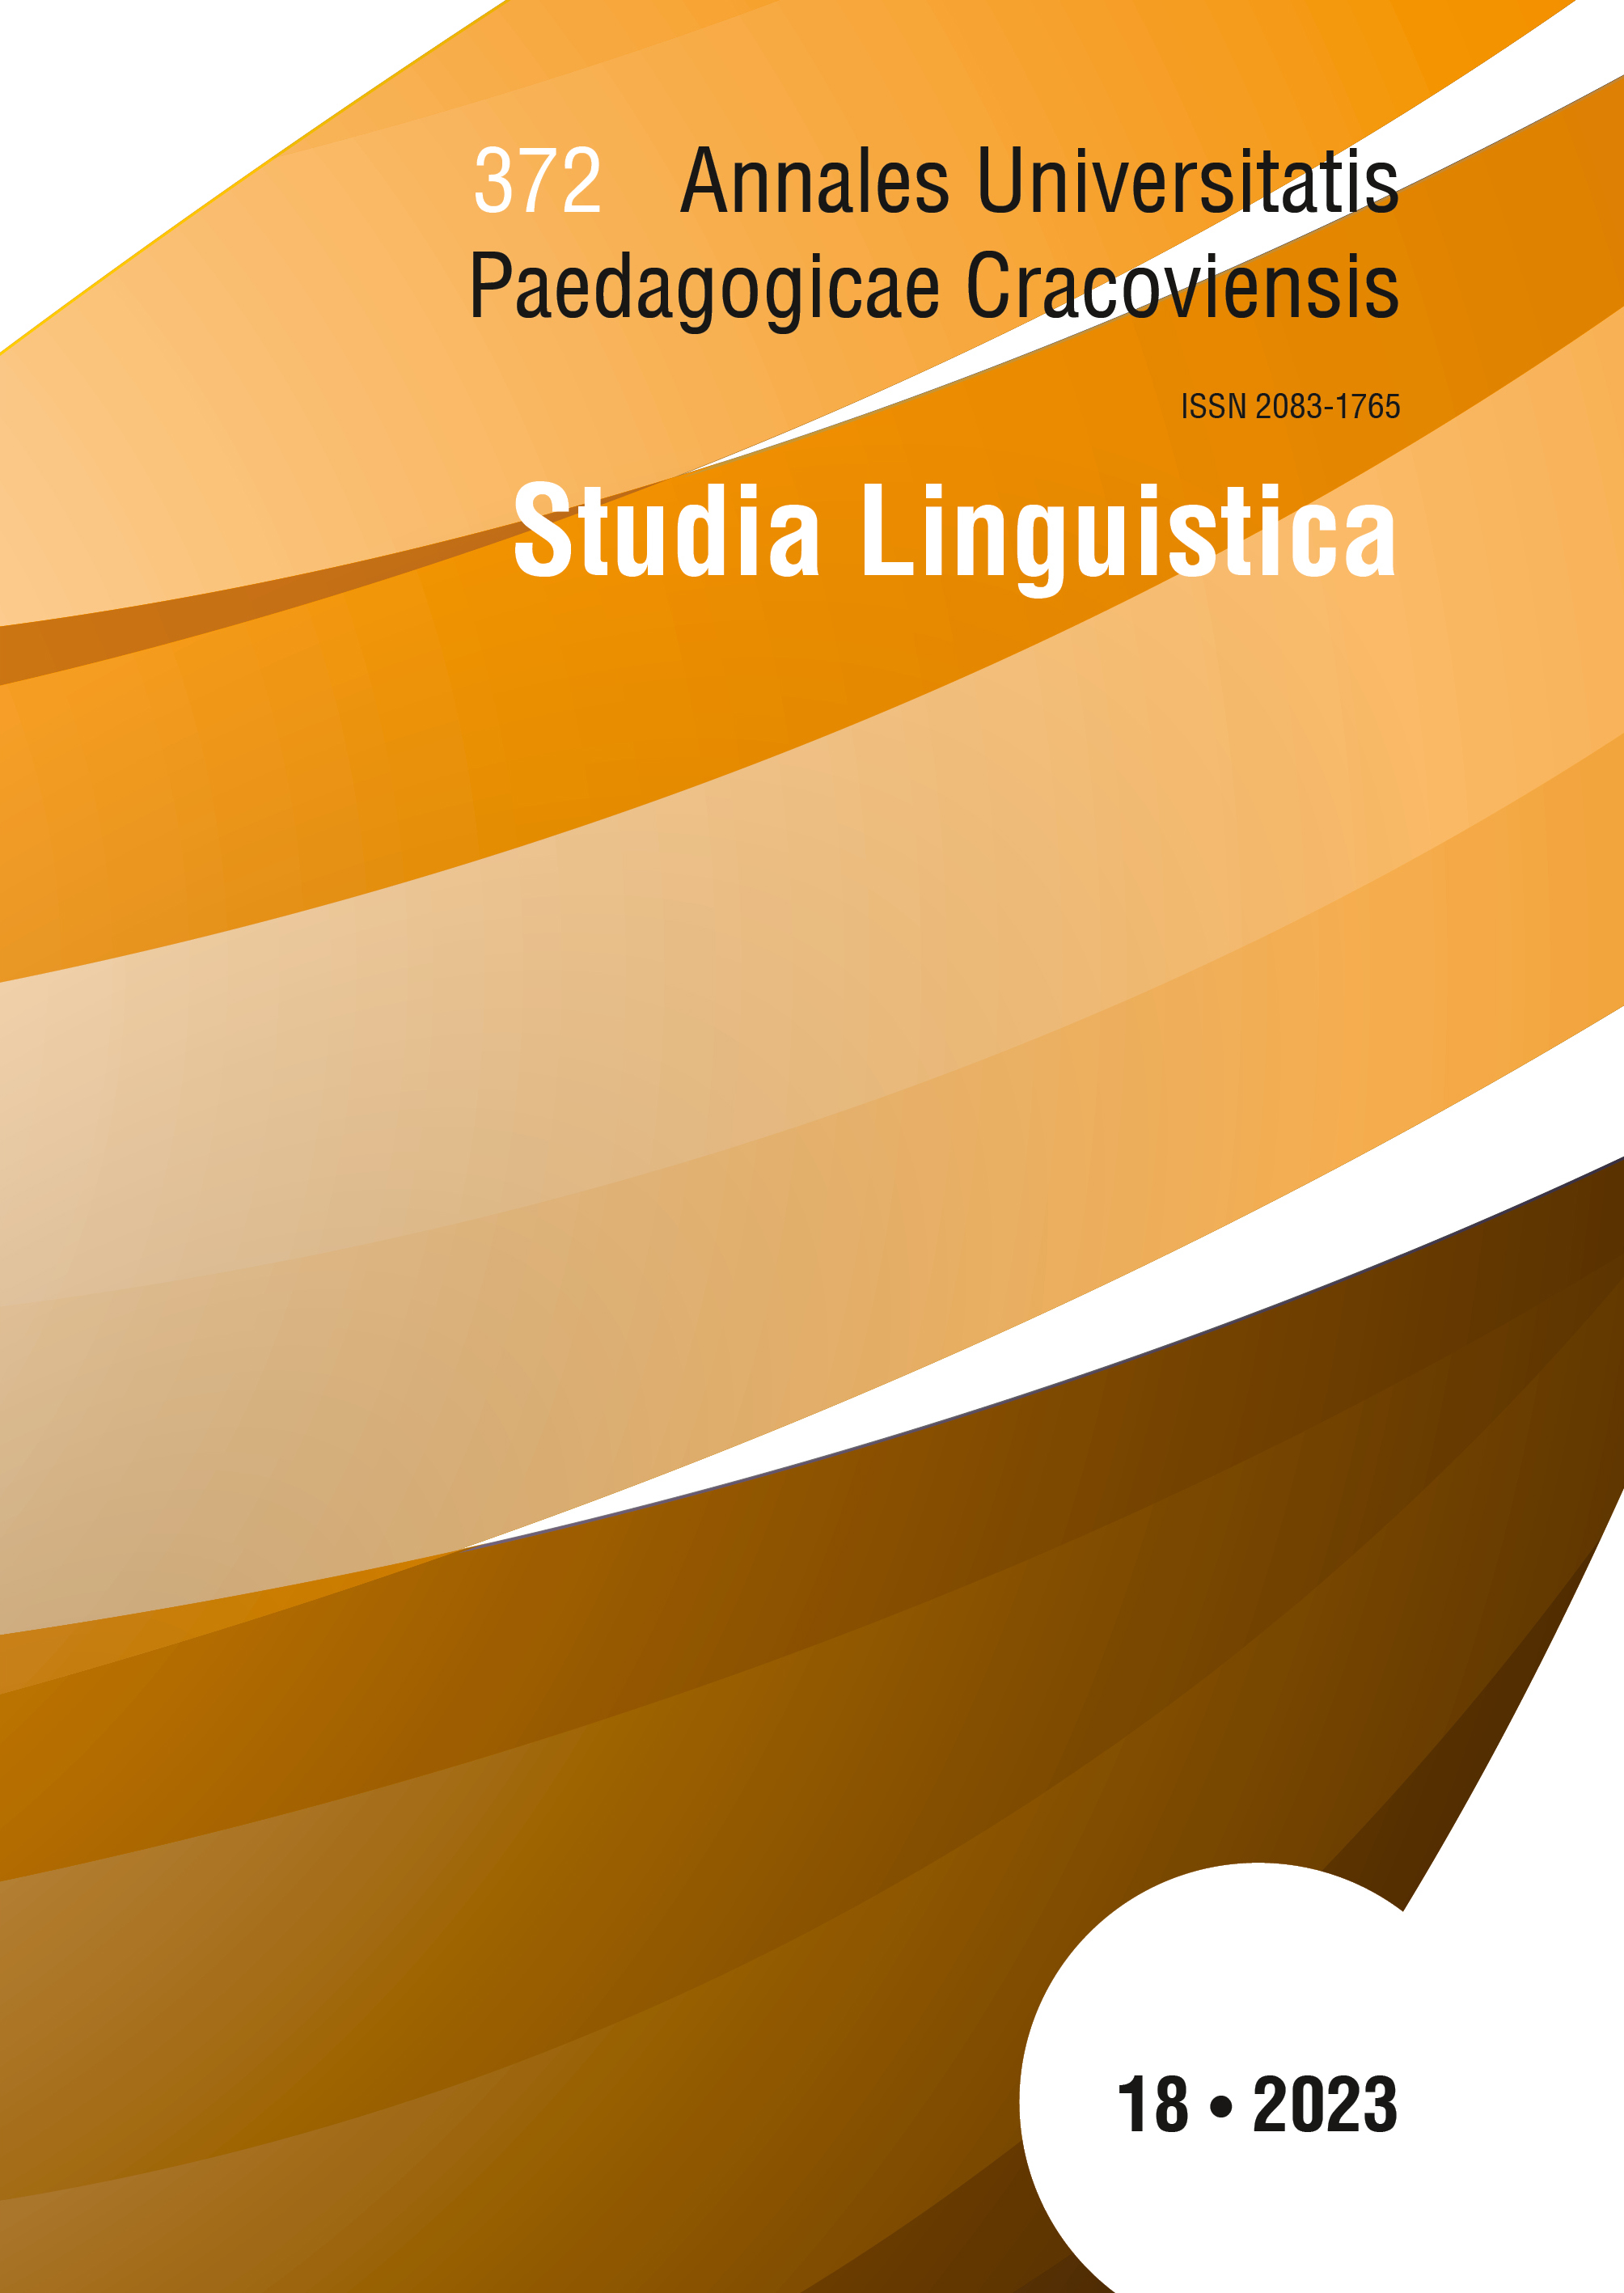 Early signs of disruption of the language system acquisition process Cover Image